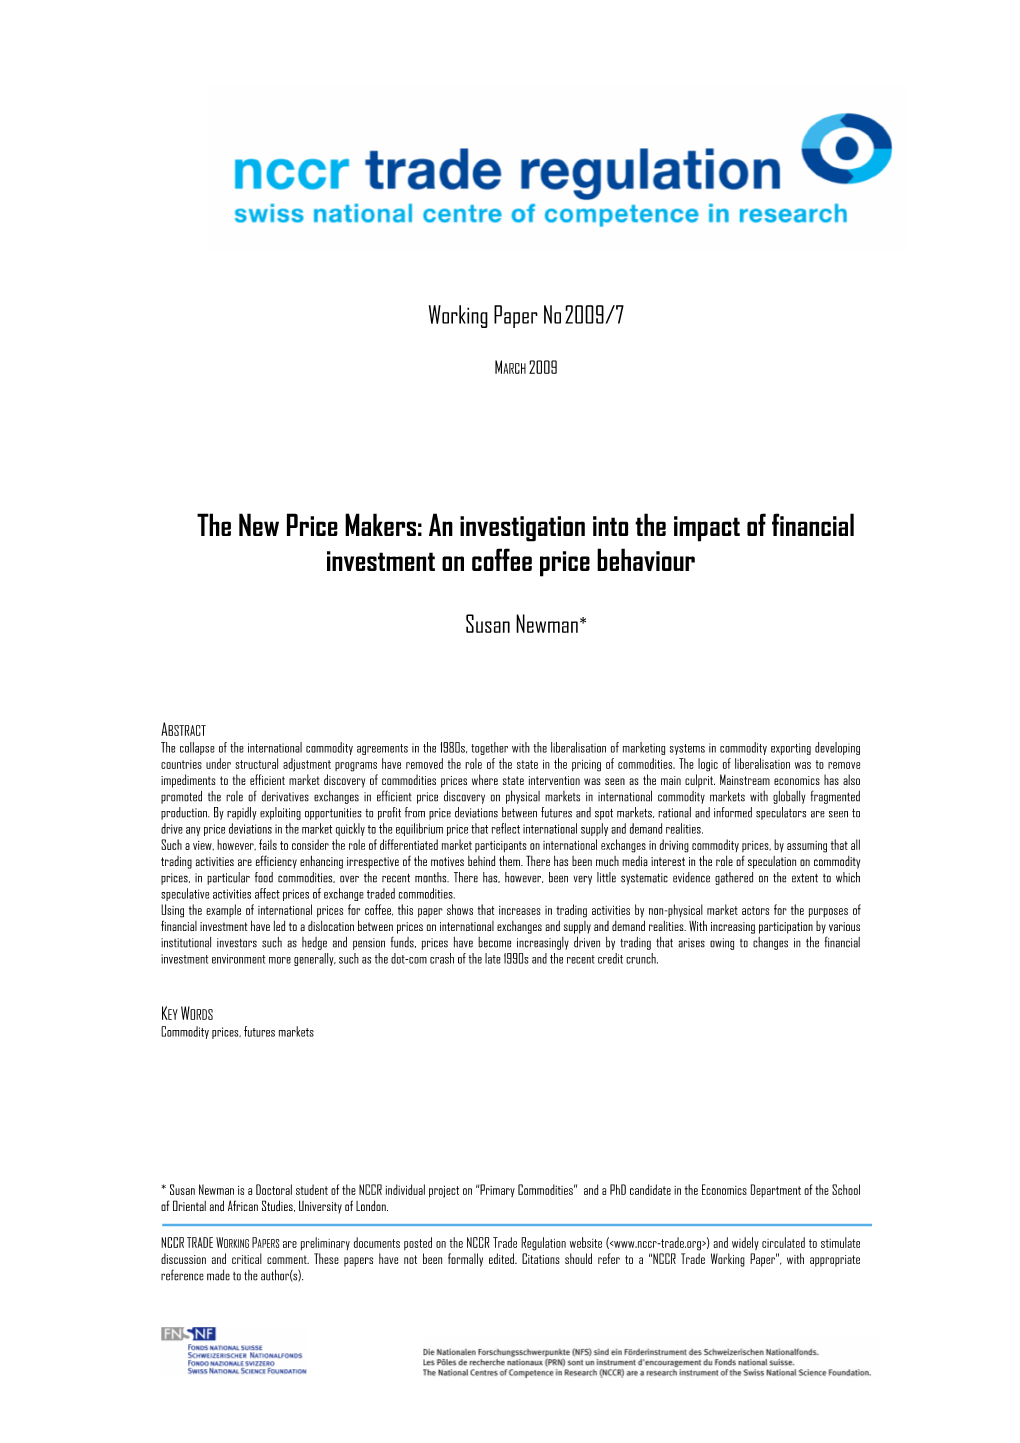 An Investigation Into the Impact of Financial Investment on Coffee Price Behaviour